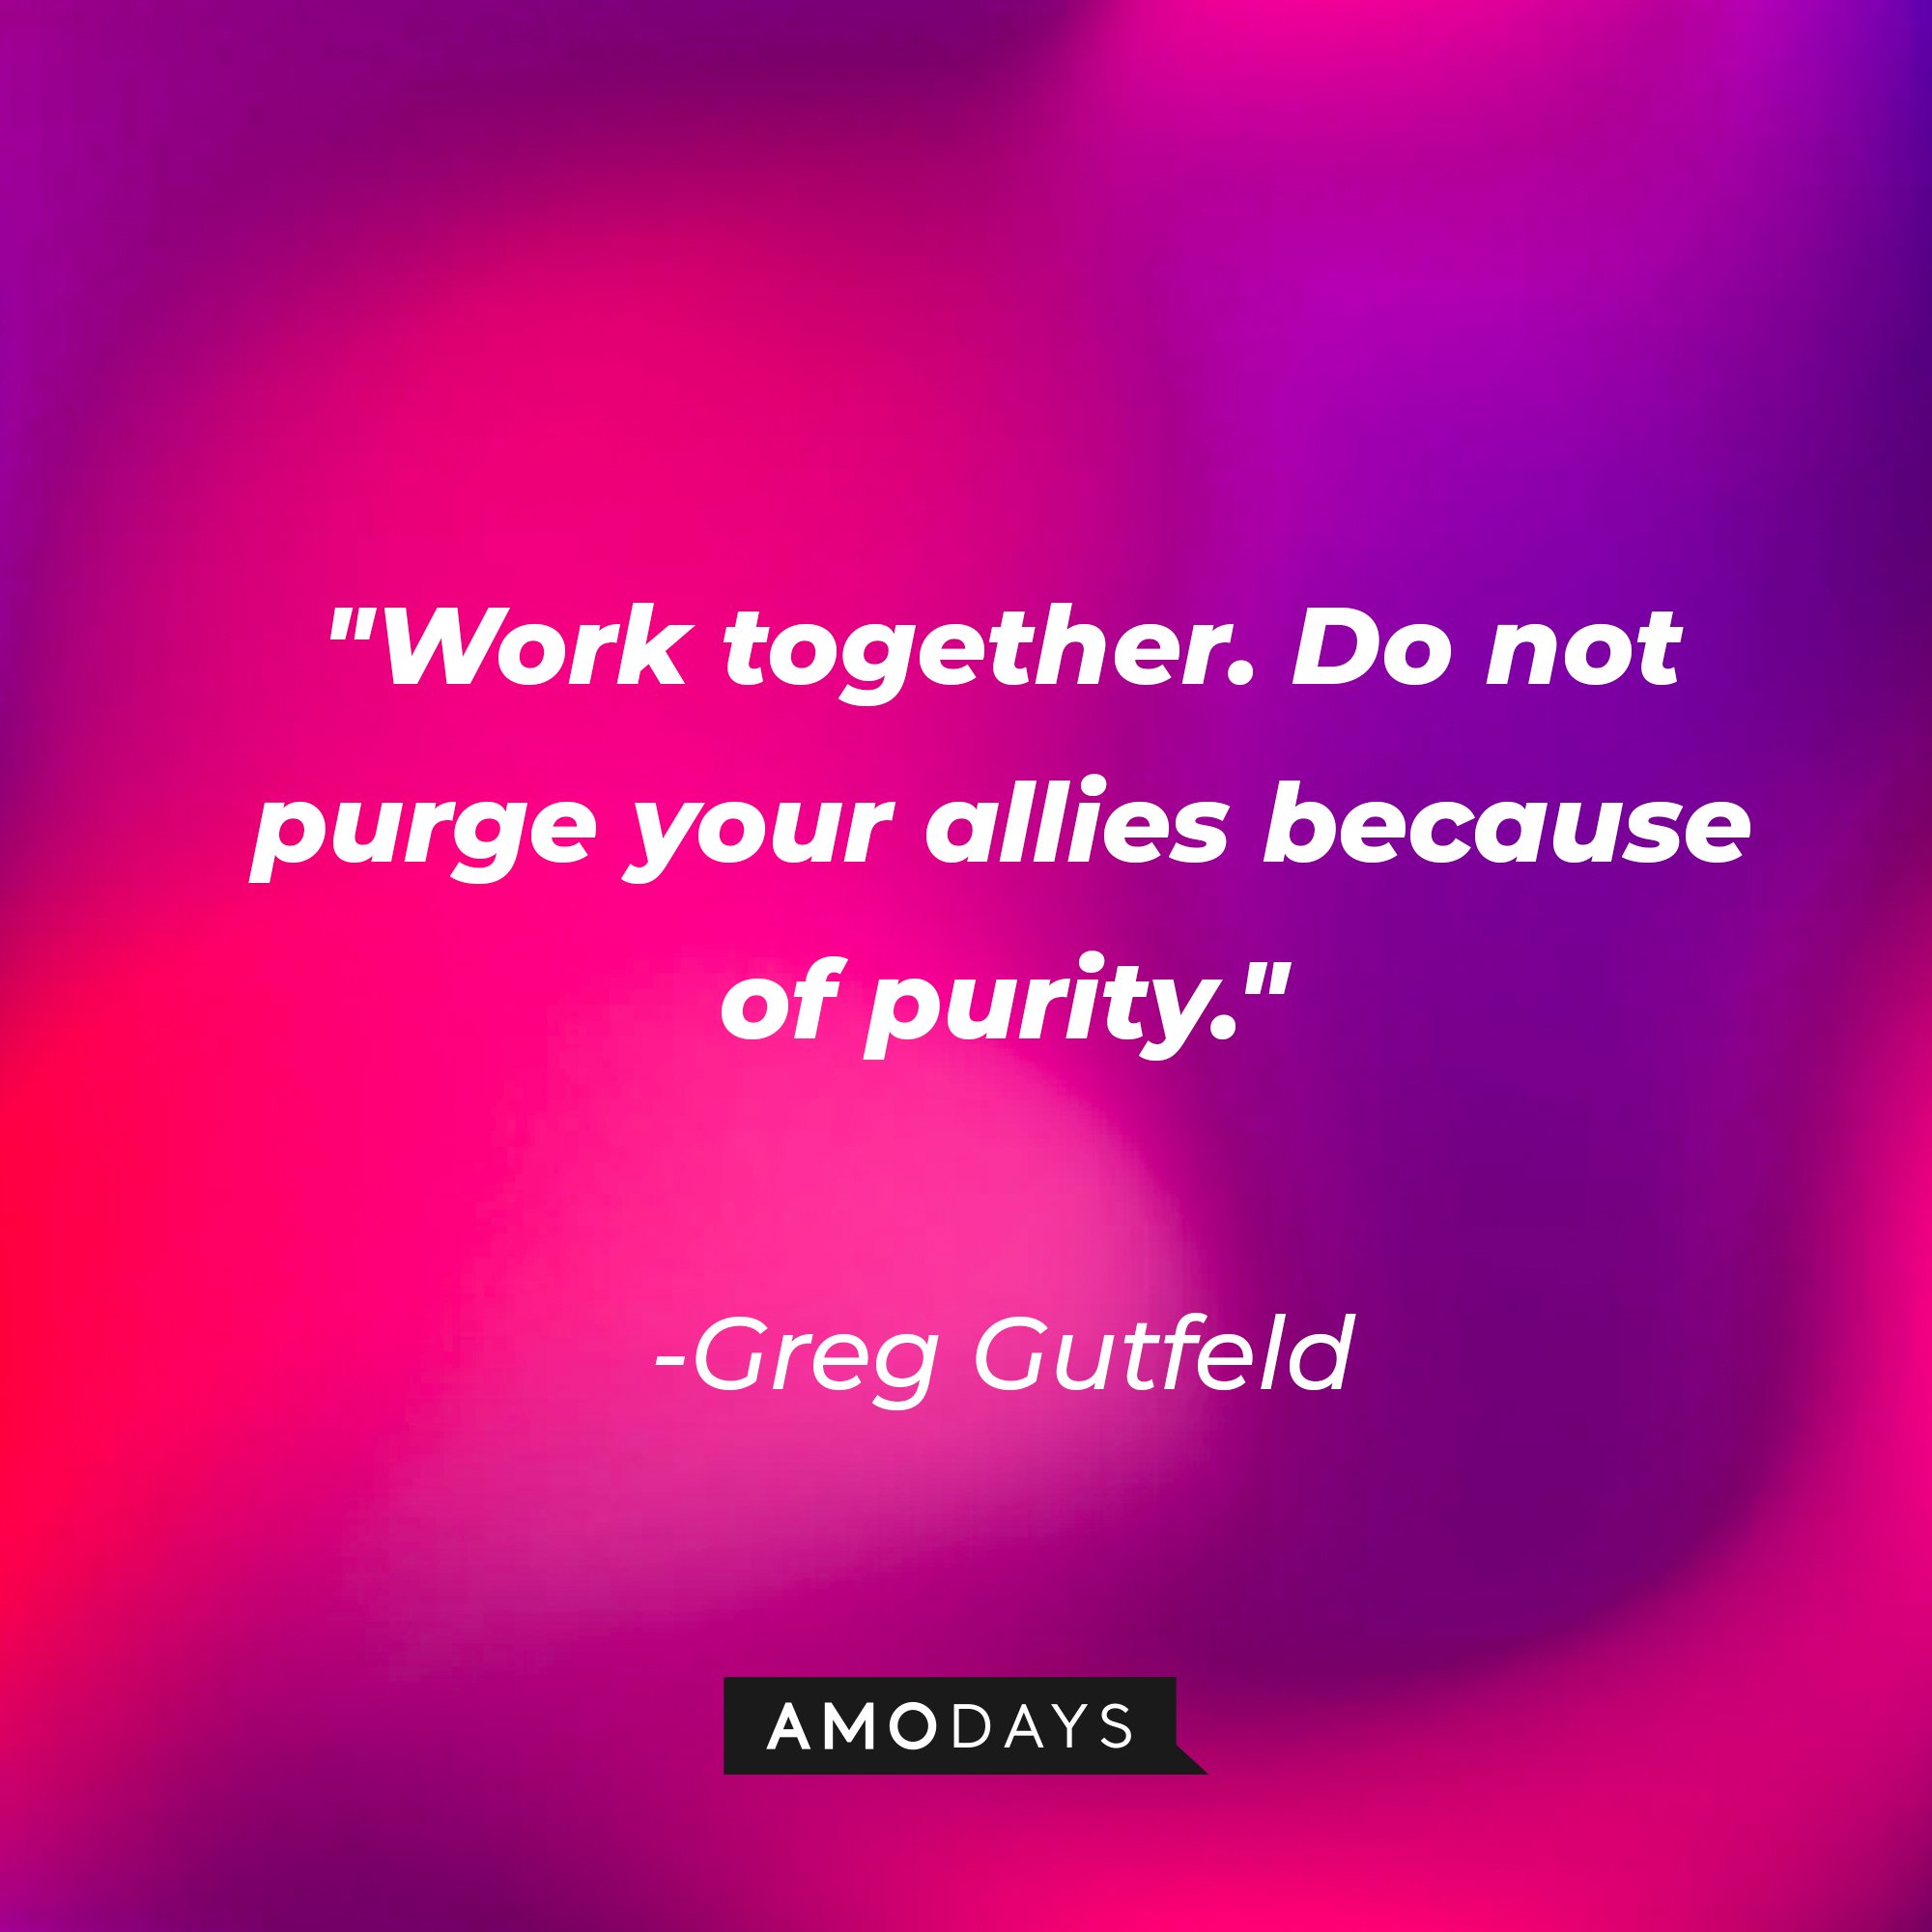 Greg Gutfeld’s quote: "Work together. Do not purge your allies because of purity." | Image: AmoDays 